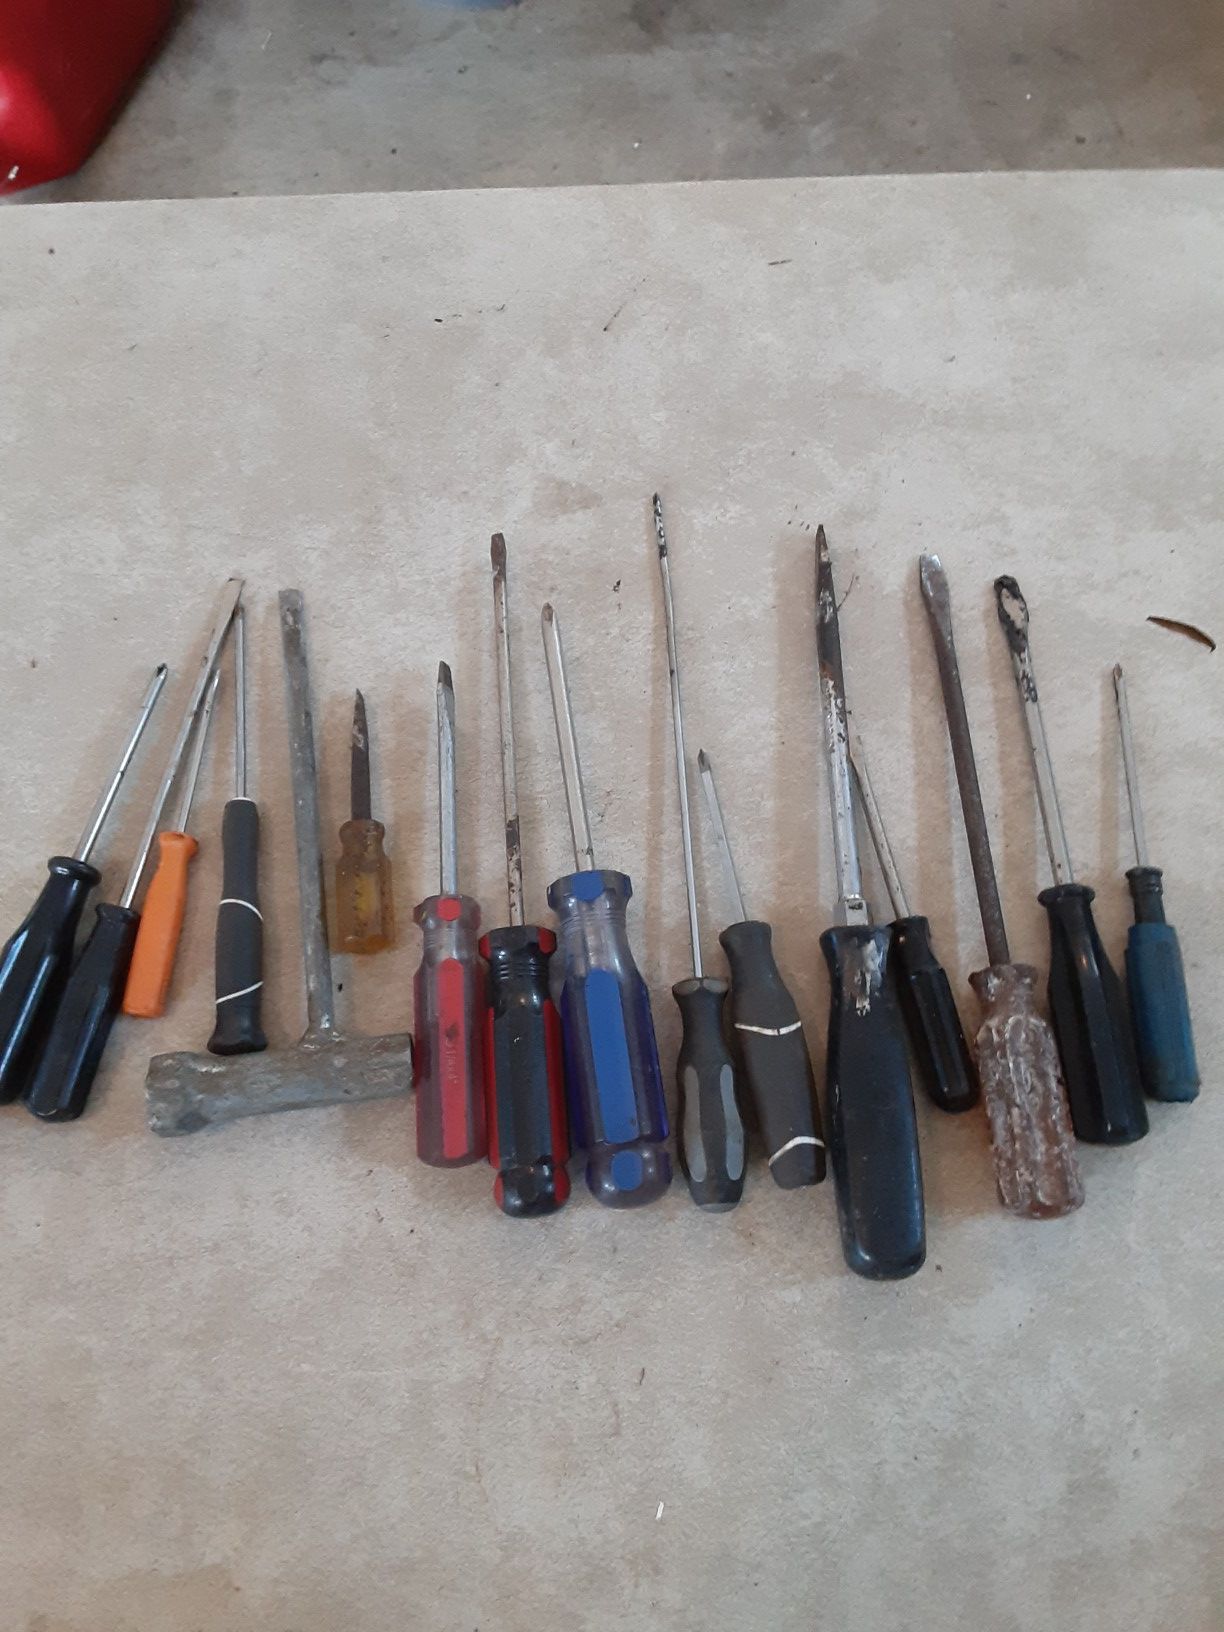 Miscellaneous lot of 16 screwdrivers. Lot #F. Porch Pick up in North Hagerstown Md.